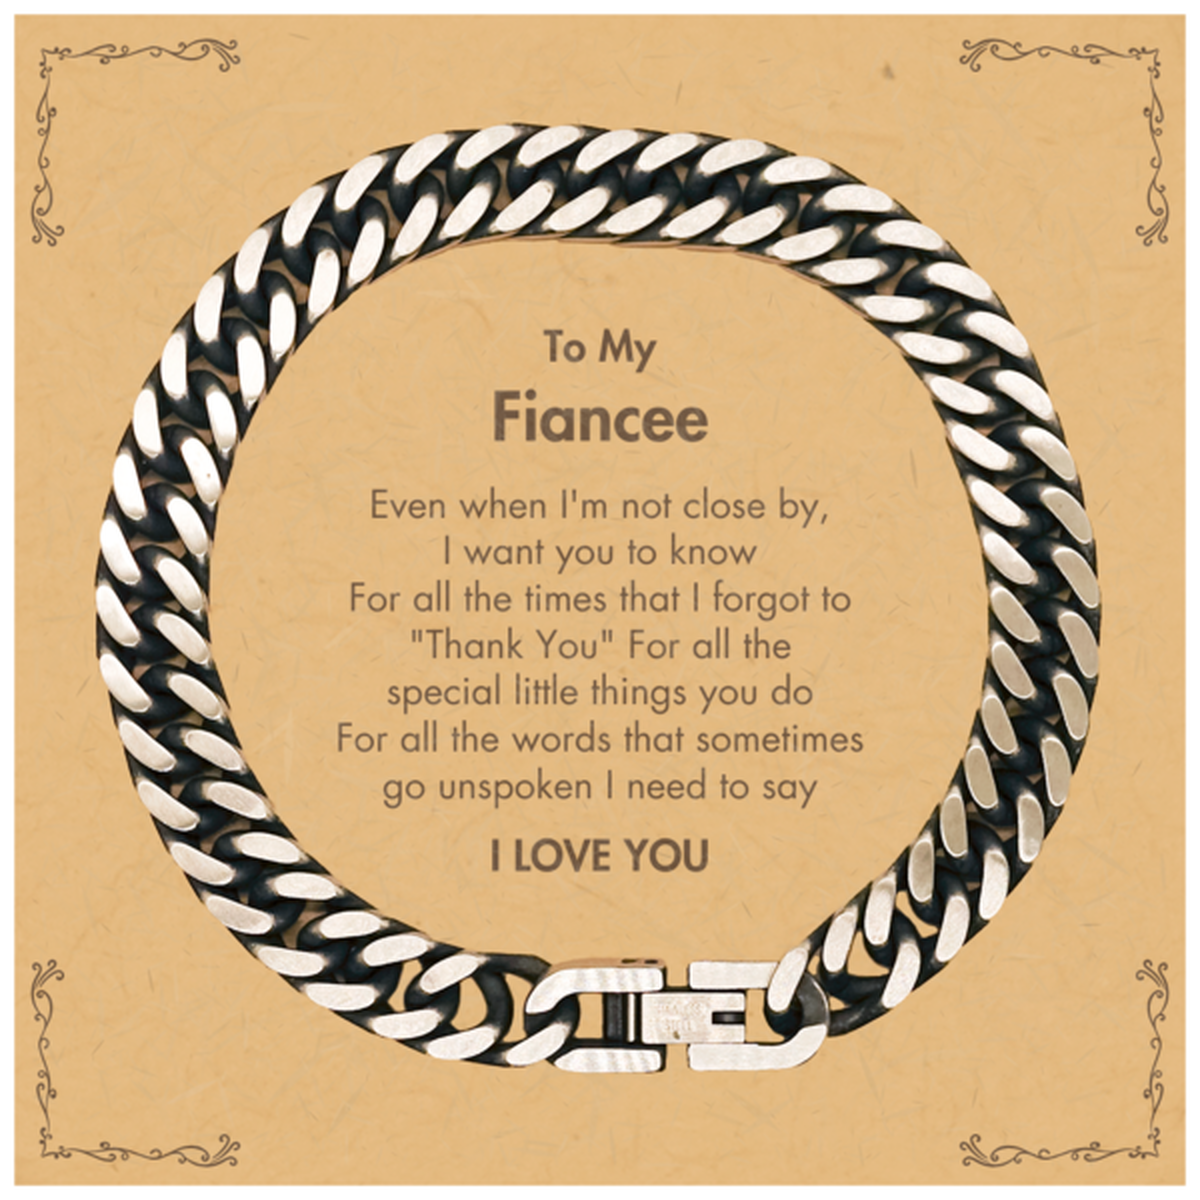 Thank You Gifts for Fiancee, Keepsake Cuban Link Chain Bracelet Gifts for Fiancee Birthday Mother's day Father's Day Fiancee For all the words That sometimes go unspoken I need to say I LOVE YOU